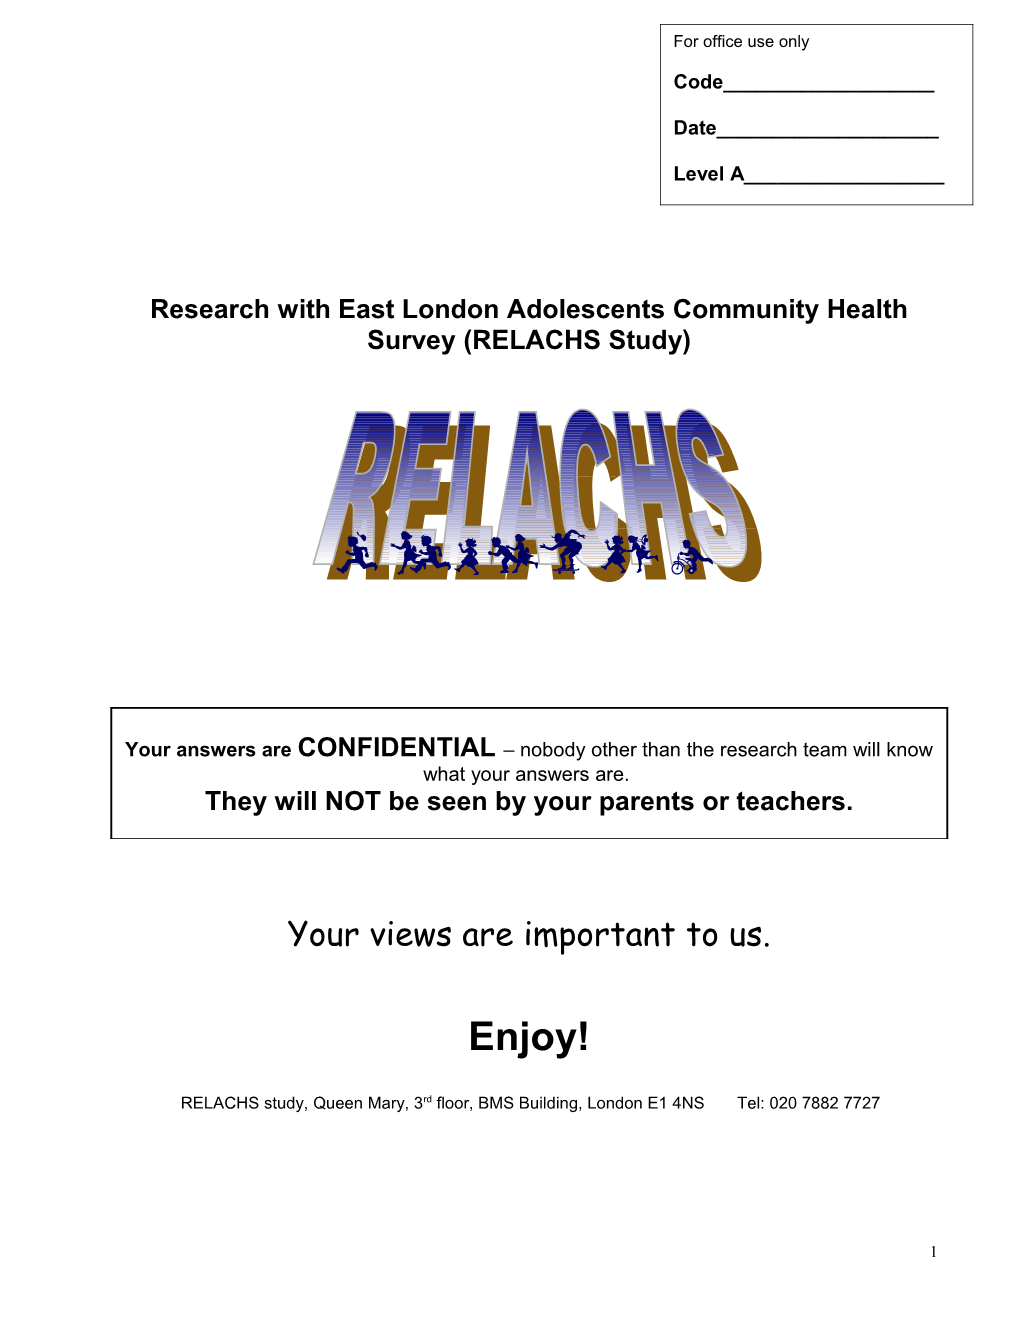 Research with East London Adolescents Community Health Survey (RELACHS Study)